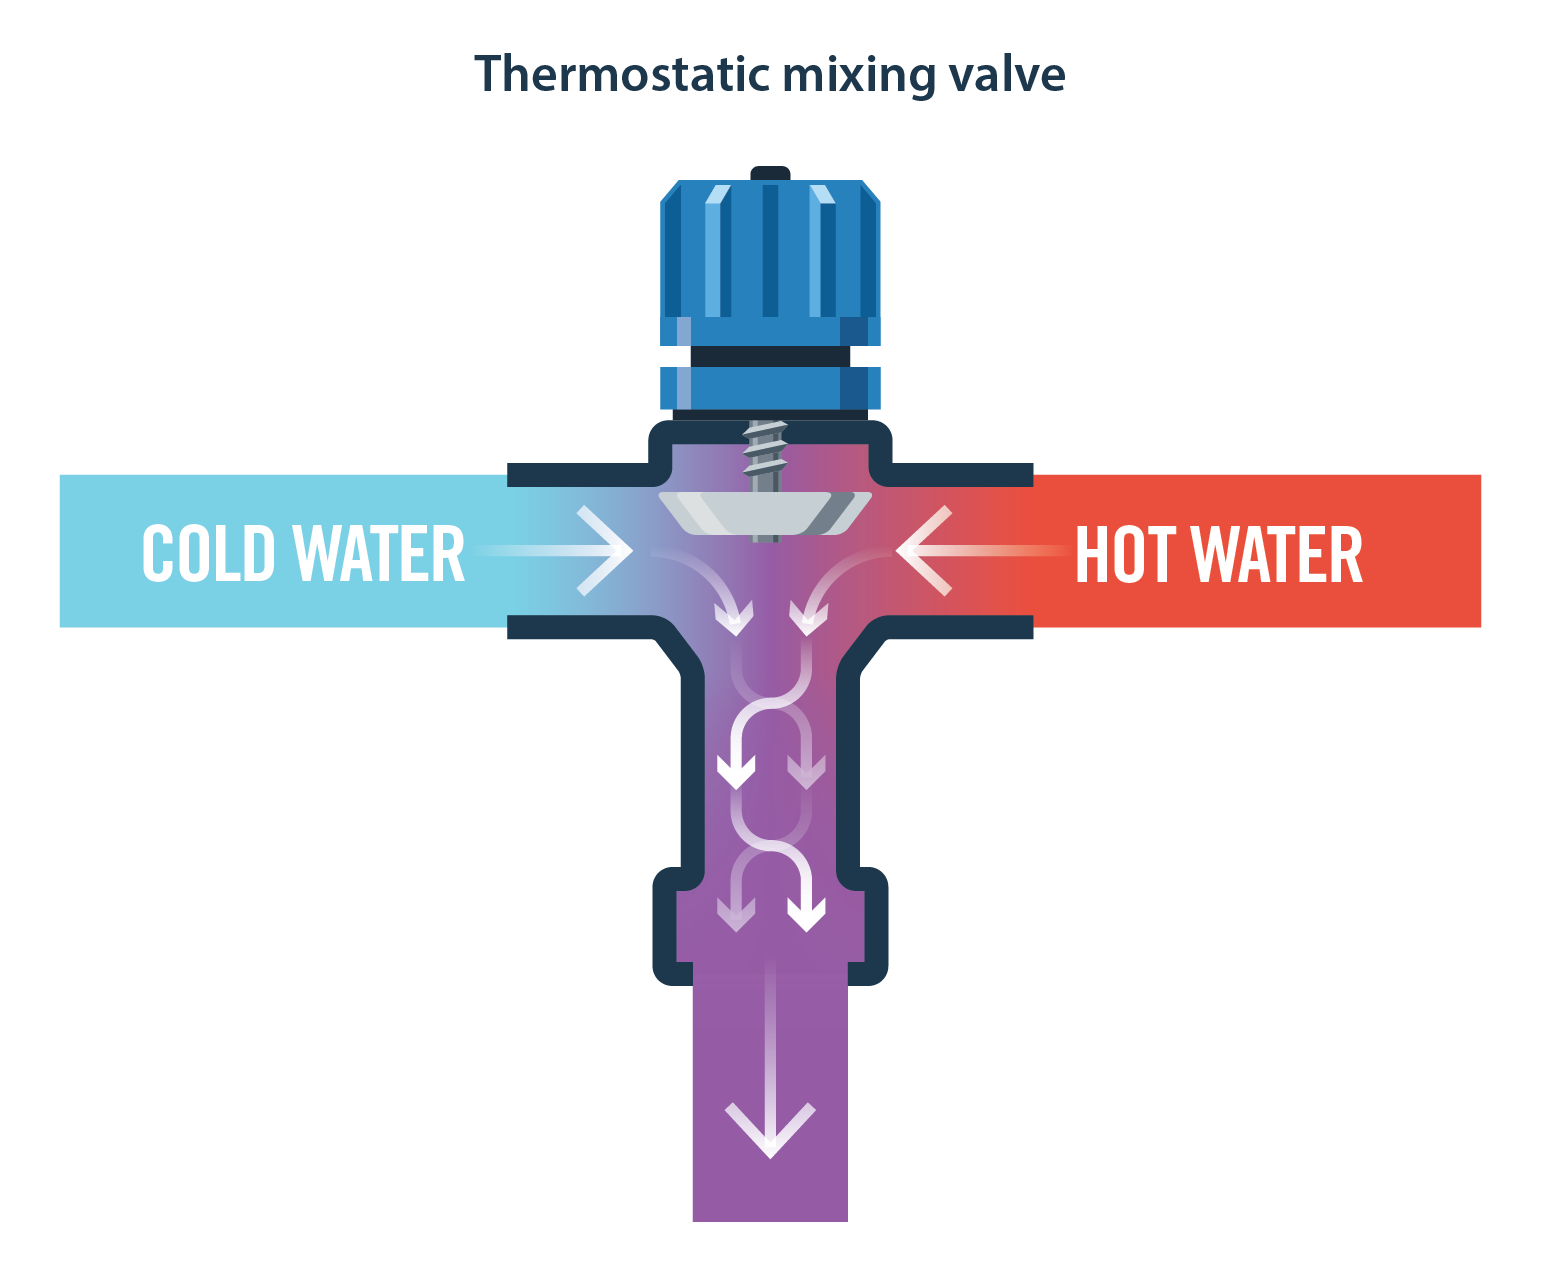 An illustration of how a thermostatic mixing valve allows hot and cold water to mix.